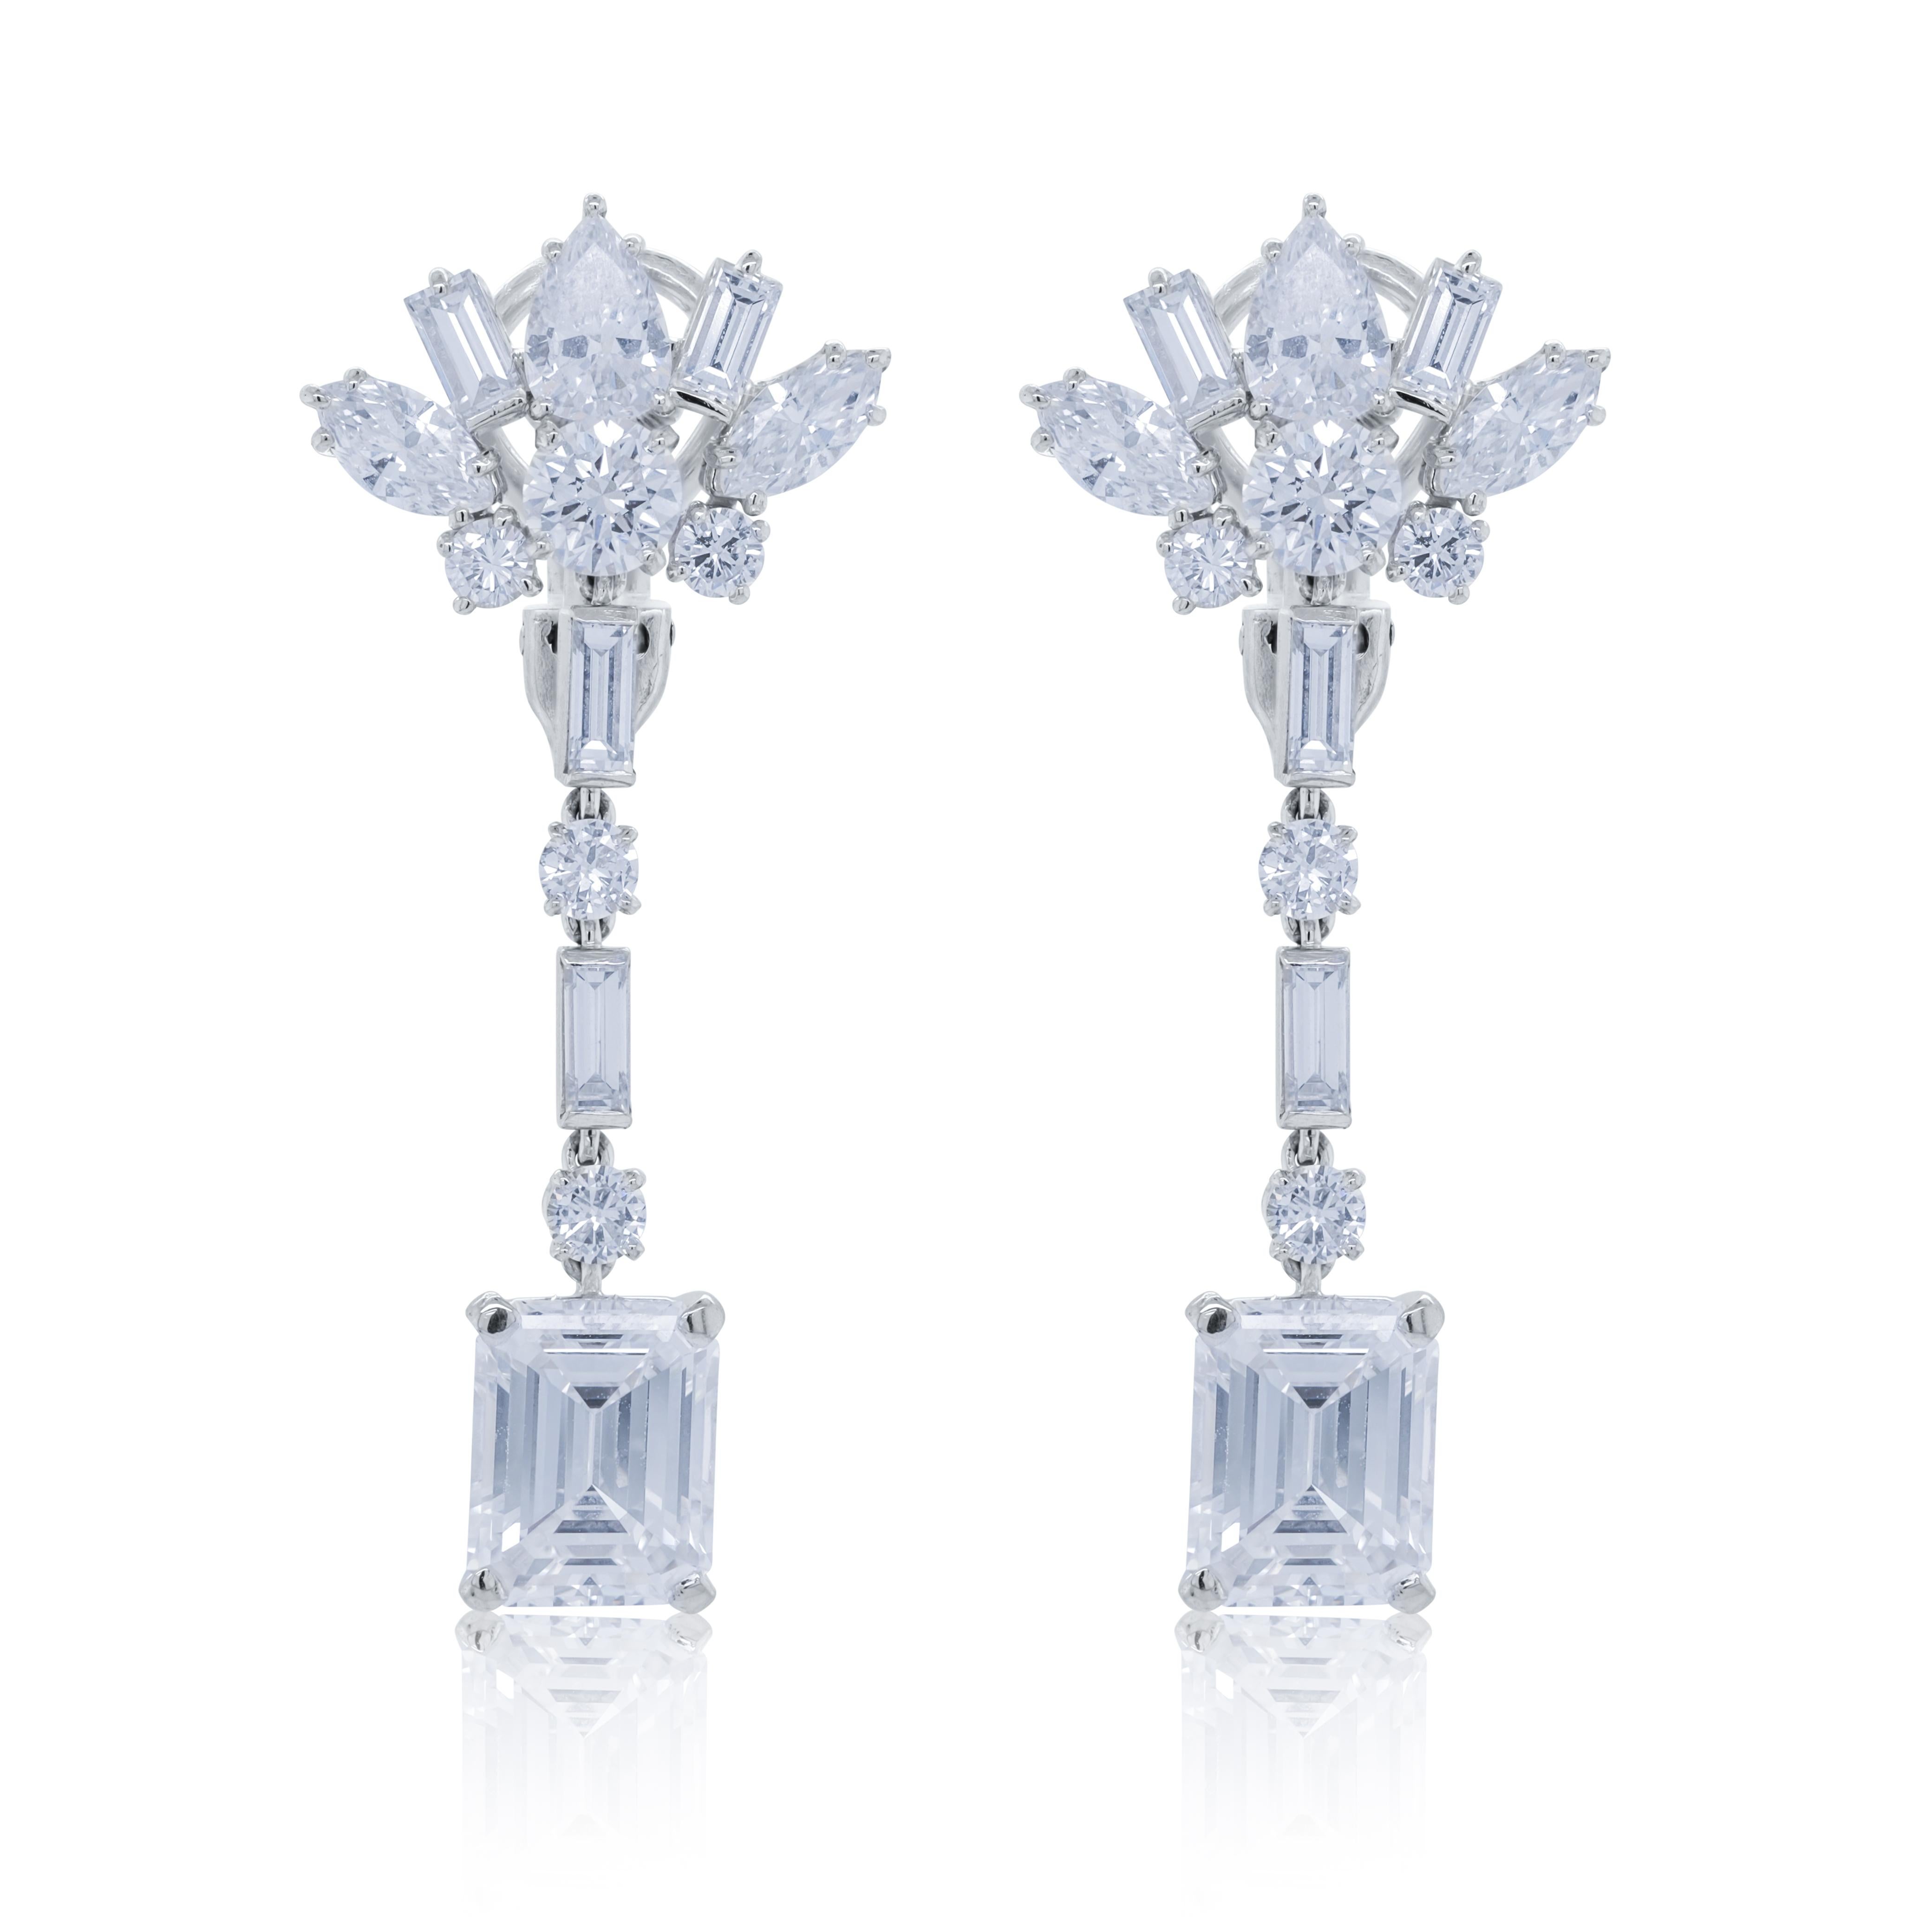 Emerald Cut Diana M. PLATINUM EARRINGS  SET WITH GIA DIAMONDS 2.47CT E VVS2 AND 2.63 F IF For Sale